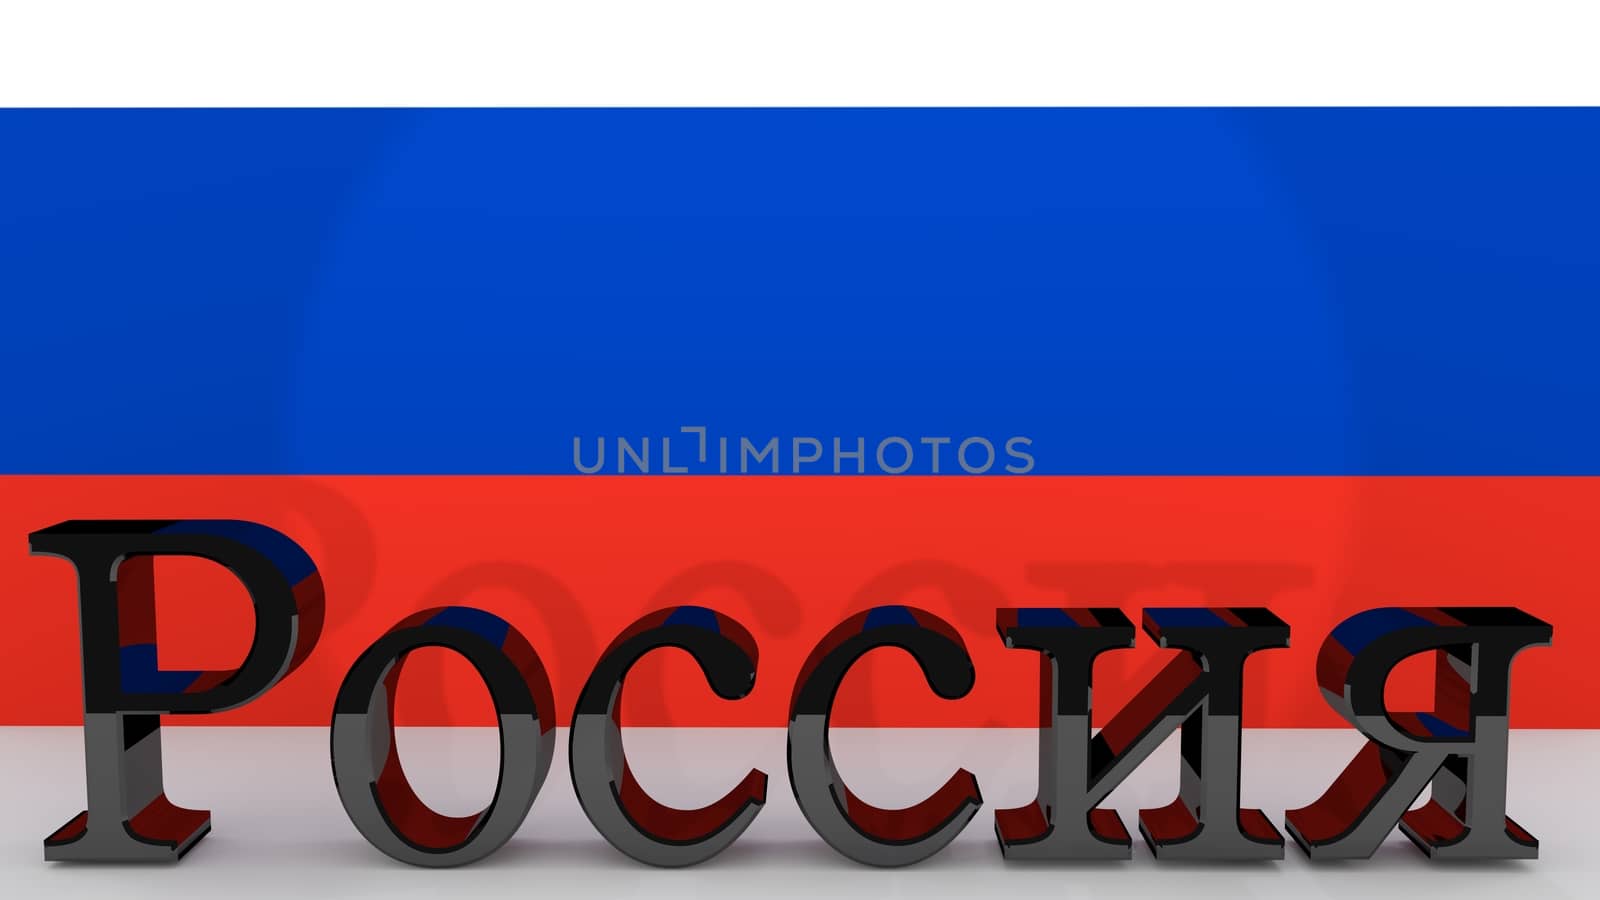 Cyrillic characters meaning Russia by MarkDw